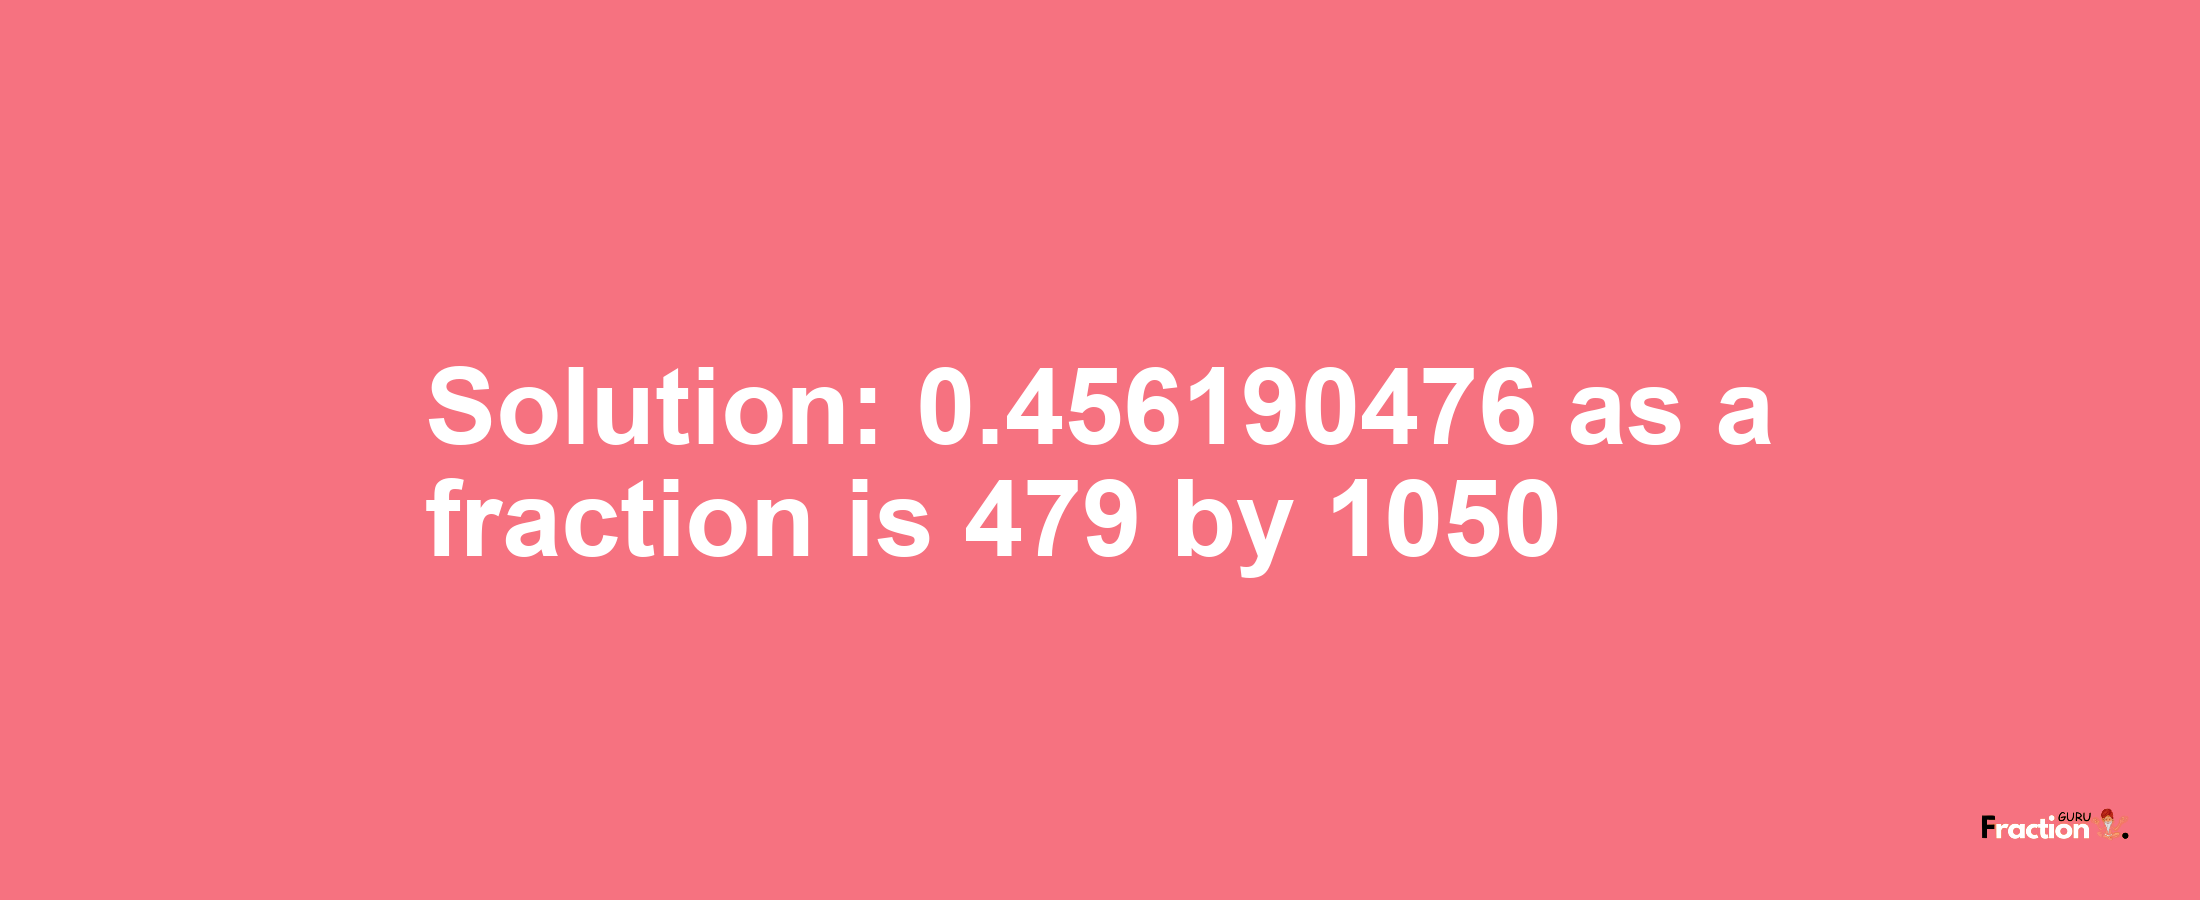 Solution:0.456190476 as a fraction is 479/1050